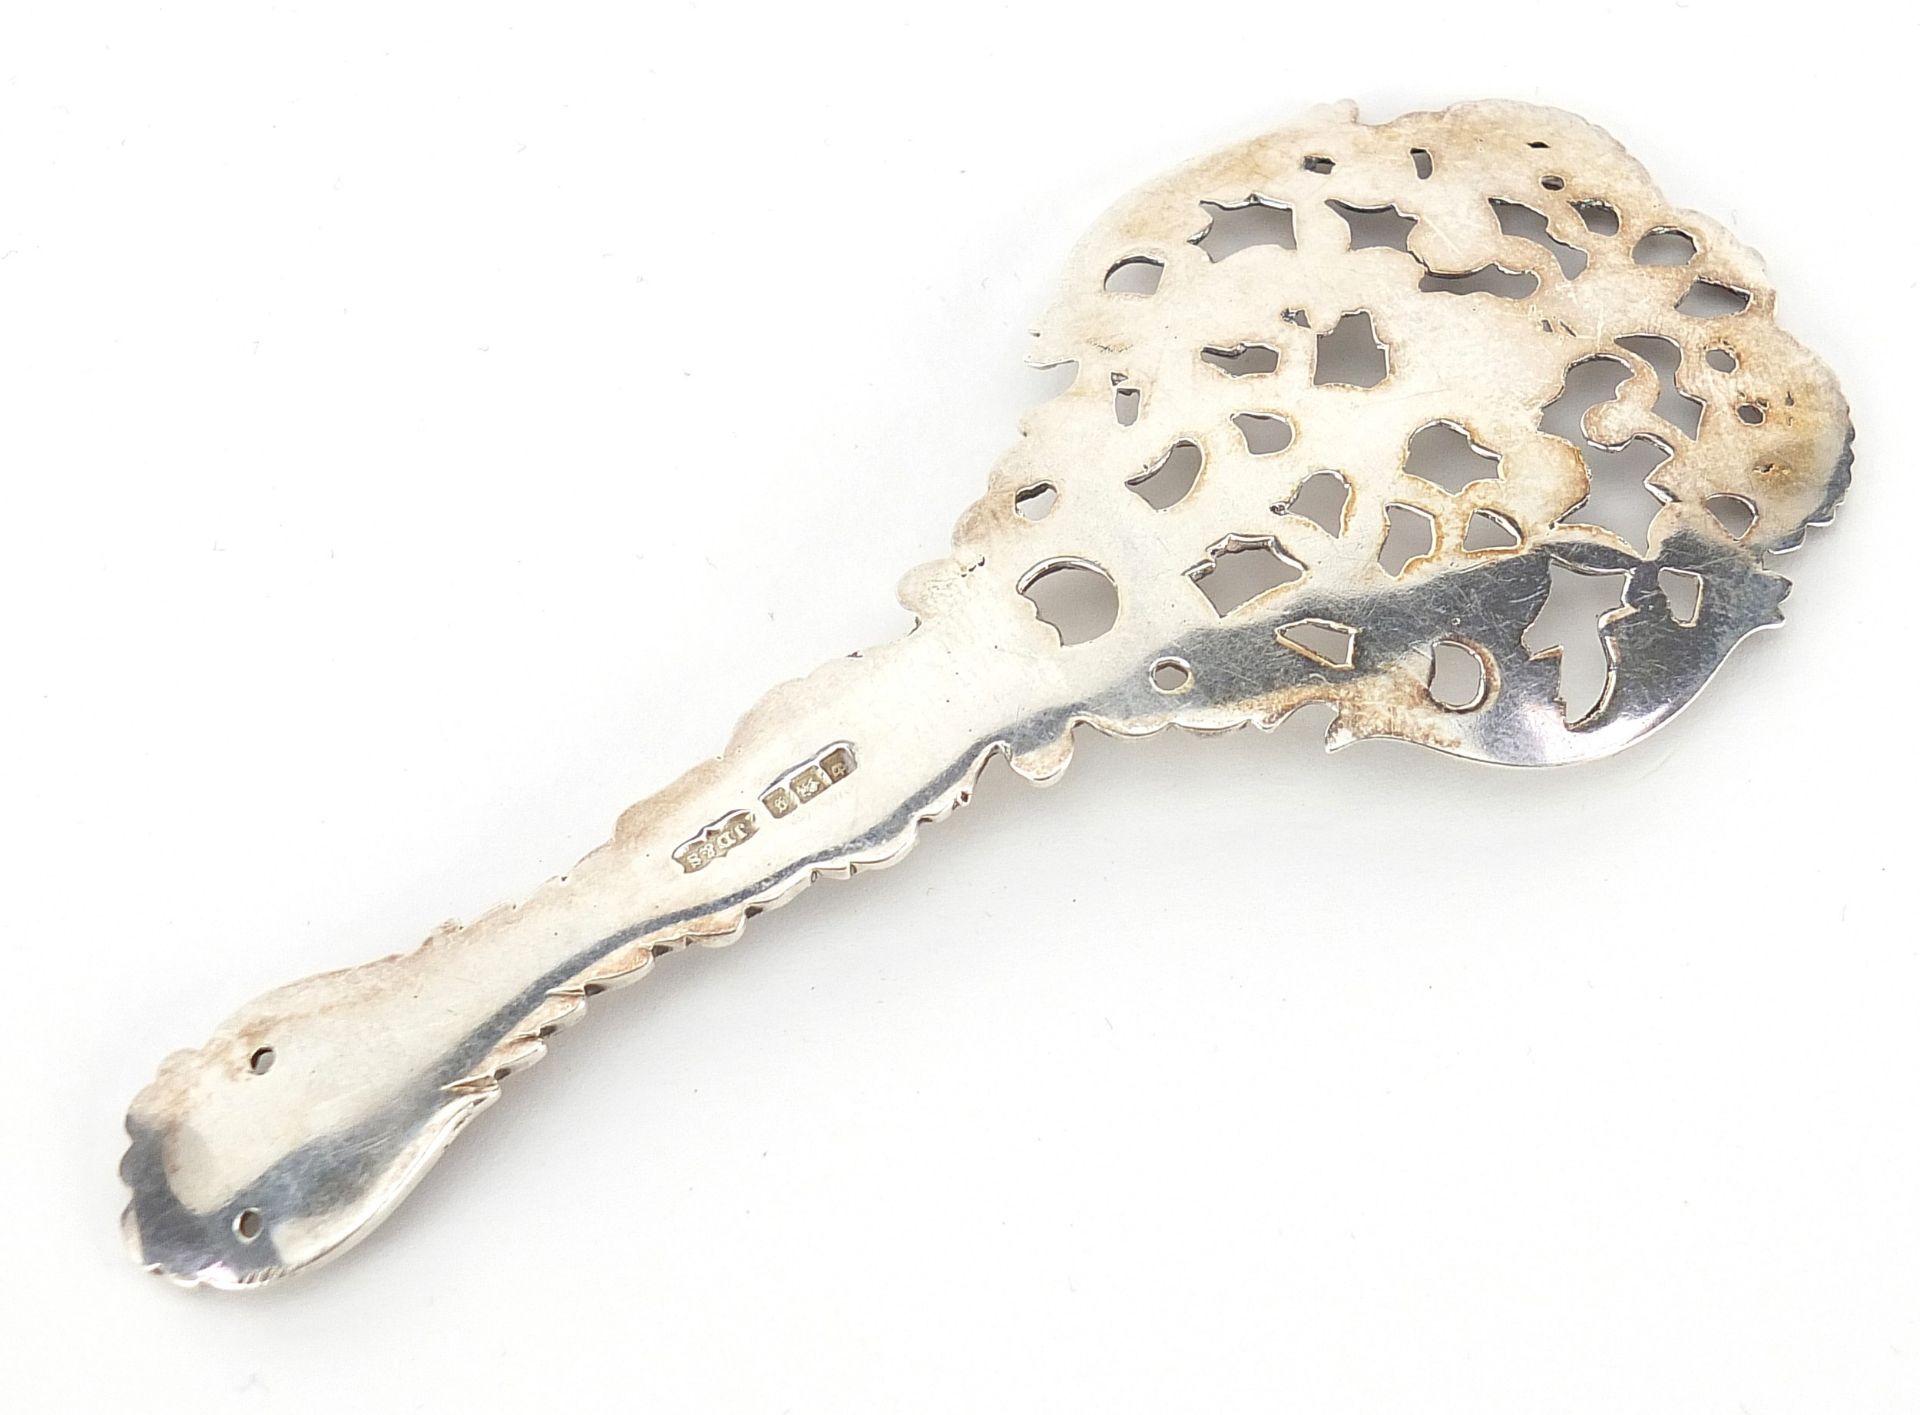 James Dixon & Sons Ltd, Victorian silver spoon pierced and embossed with a figure amongst flowers, - Image 2 of 3